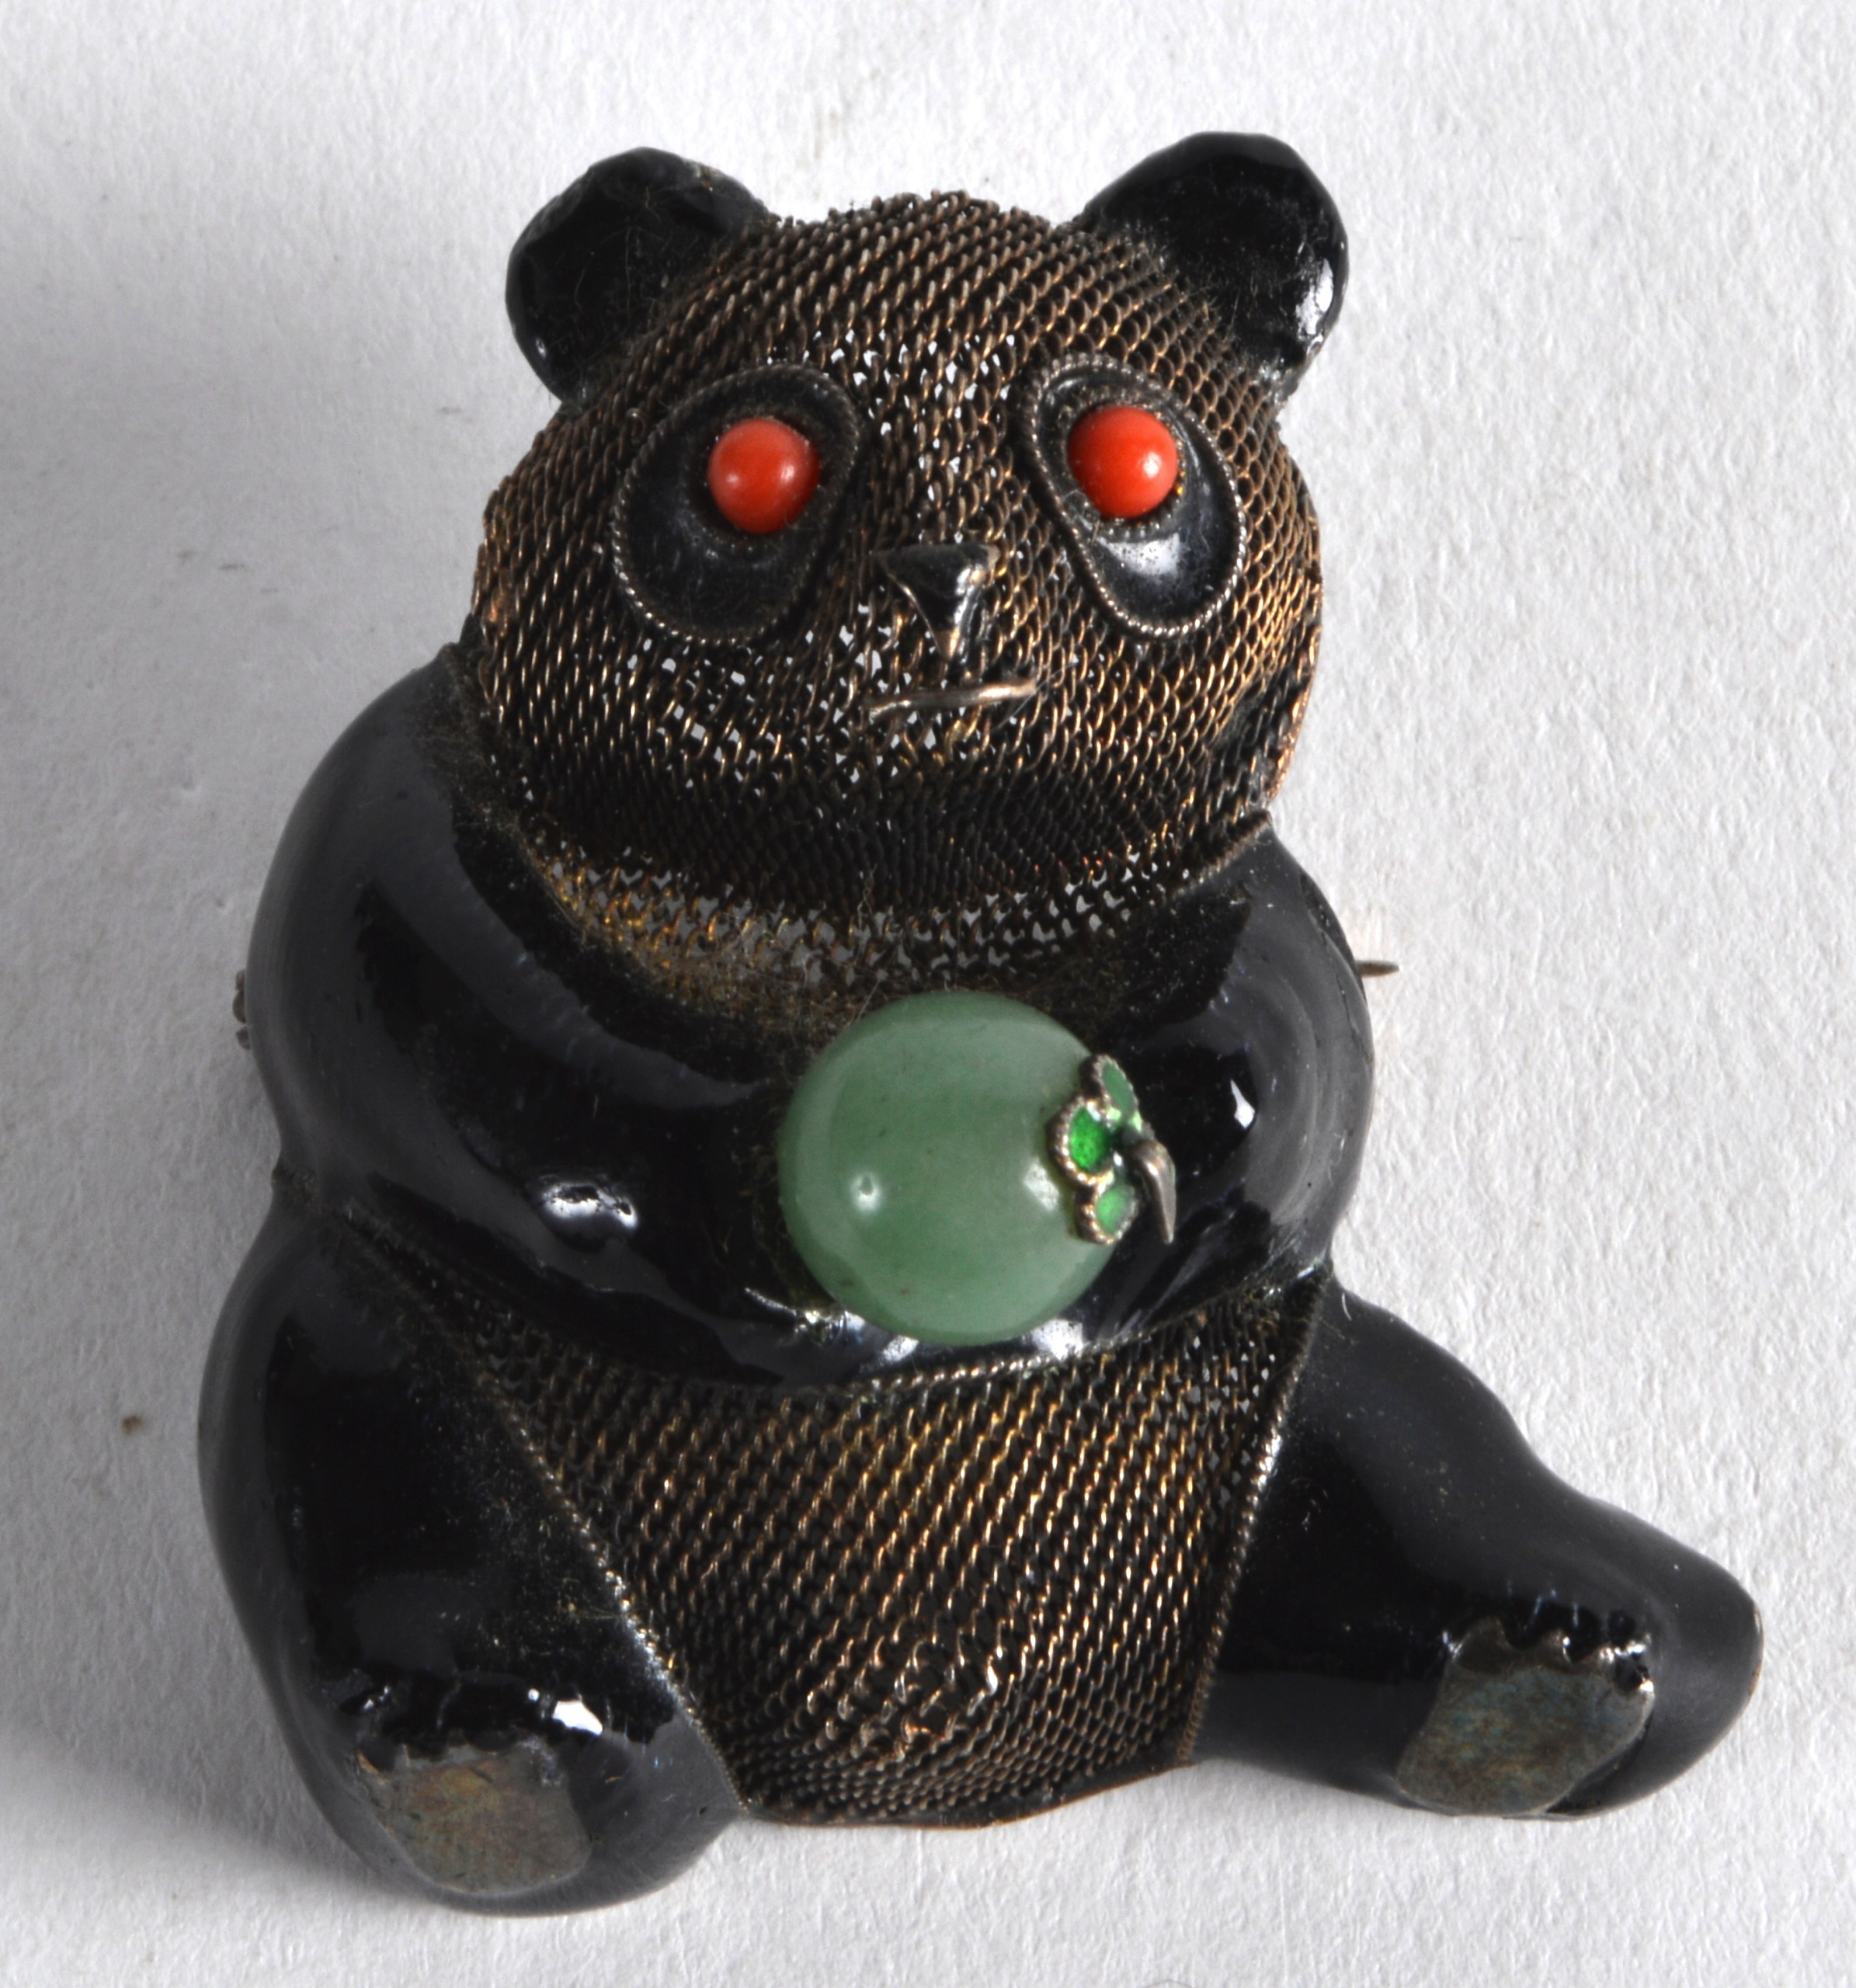 AN EARLY 20TH CENTURY CHINESE SILVER AND ENAMEL PANDA BROOCH with coral and jadeite mounts. 1.5ins